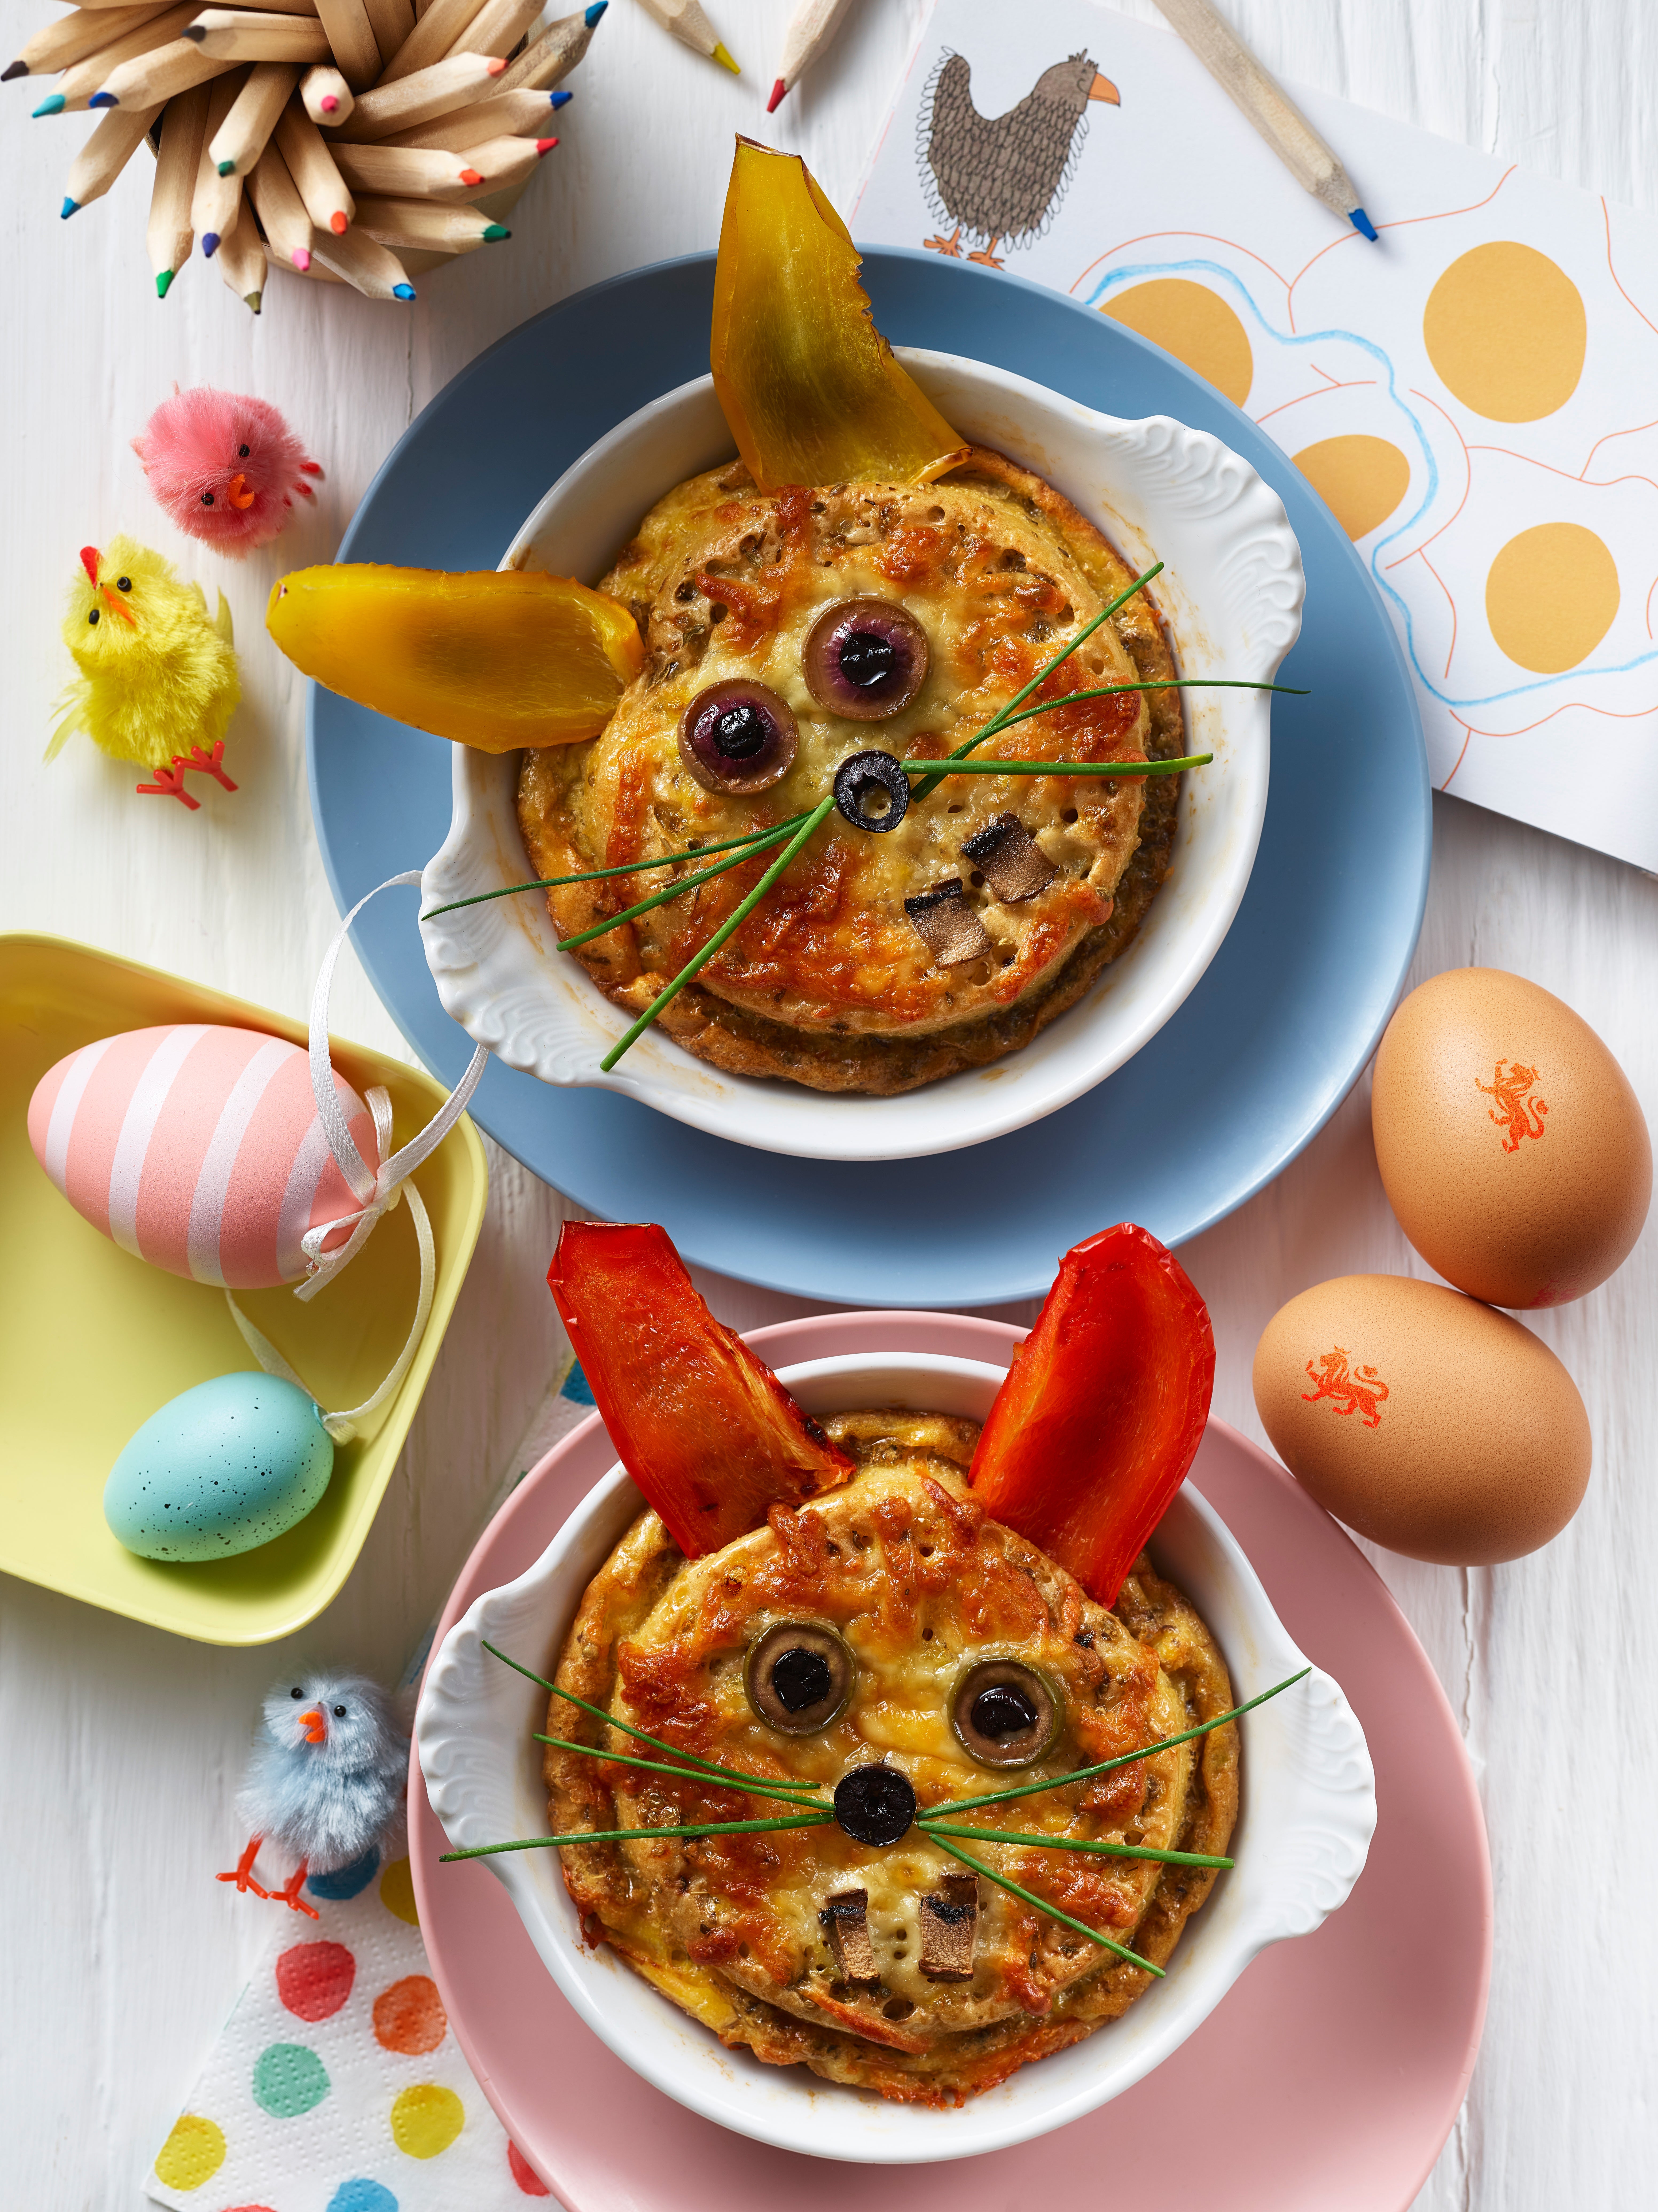 Get the kids involved in making these fun Easter bunny crumpets